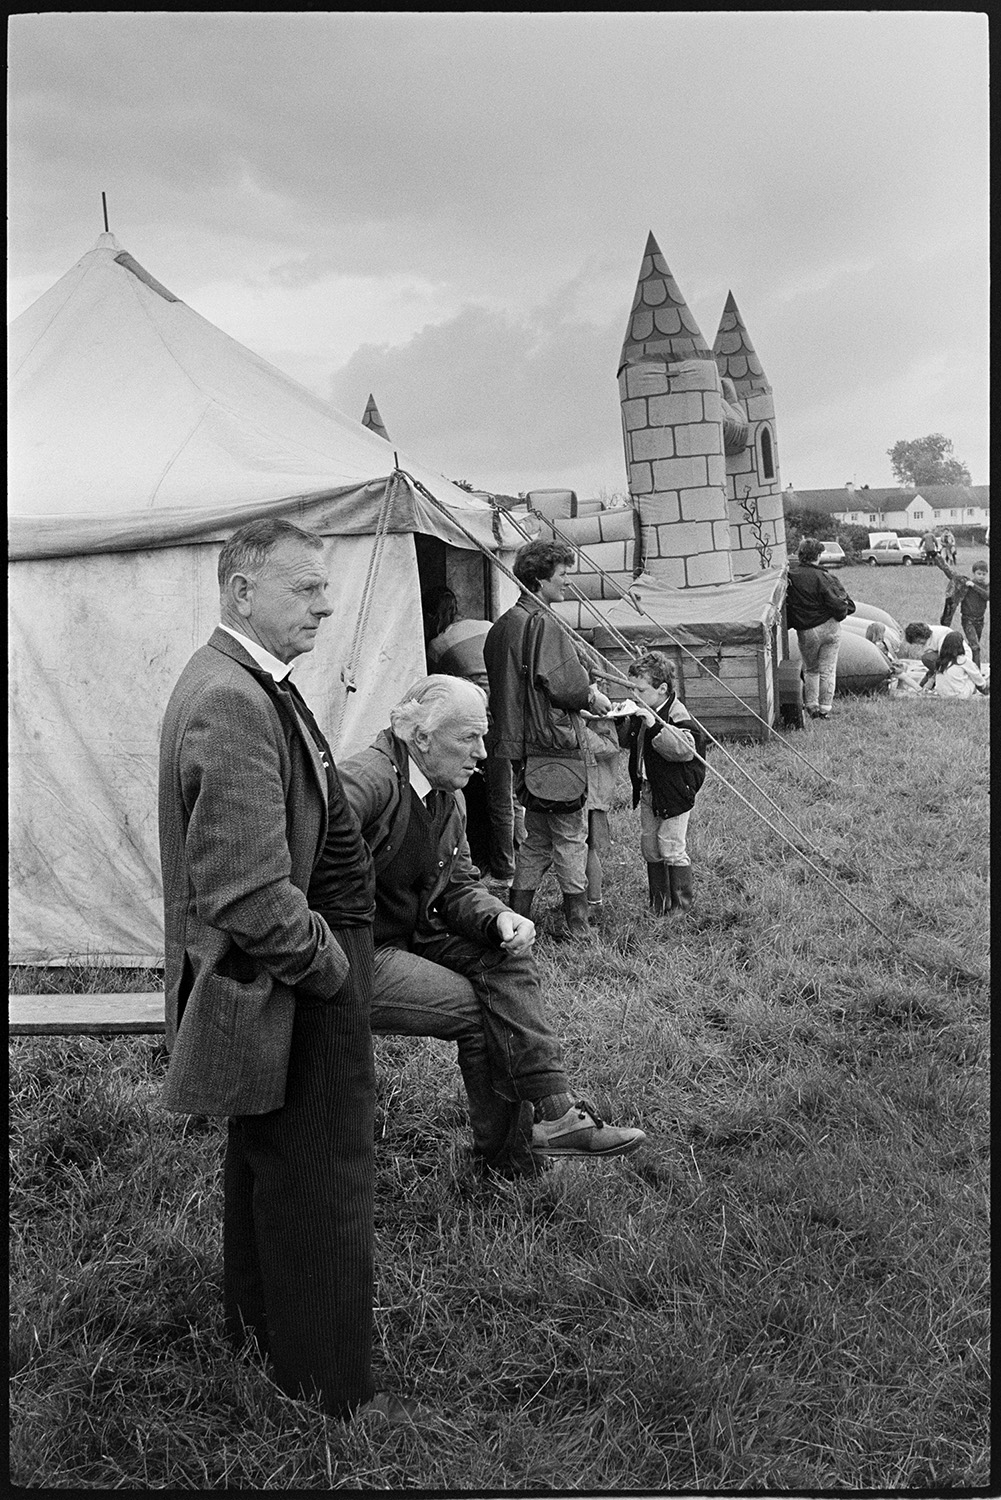 Village Club Day, sports, teas, clay pigeon shoot, committee in discussion.
[Visitors standing outside a tent during a Village Club Day at Chawleigh. There is a bouncy castle next to the tent, with some houses in the background under a stormy sky.]